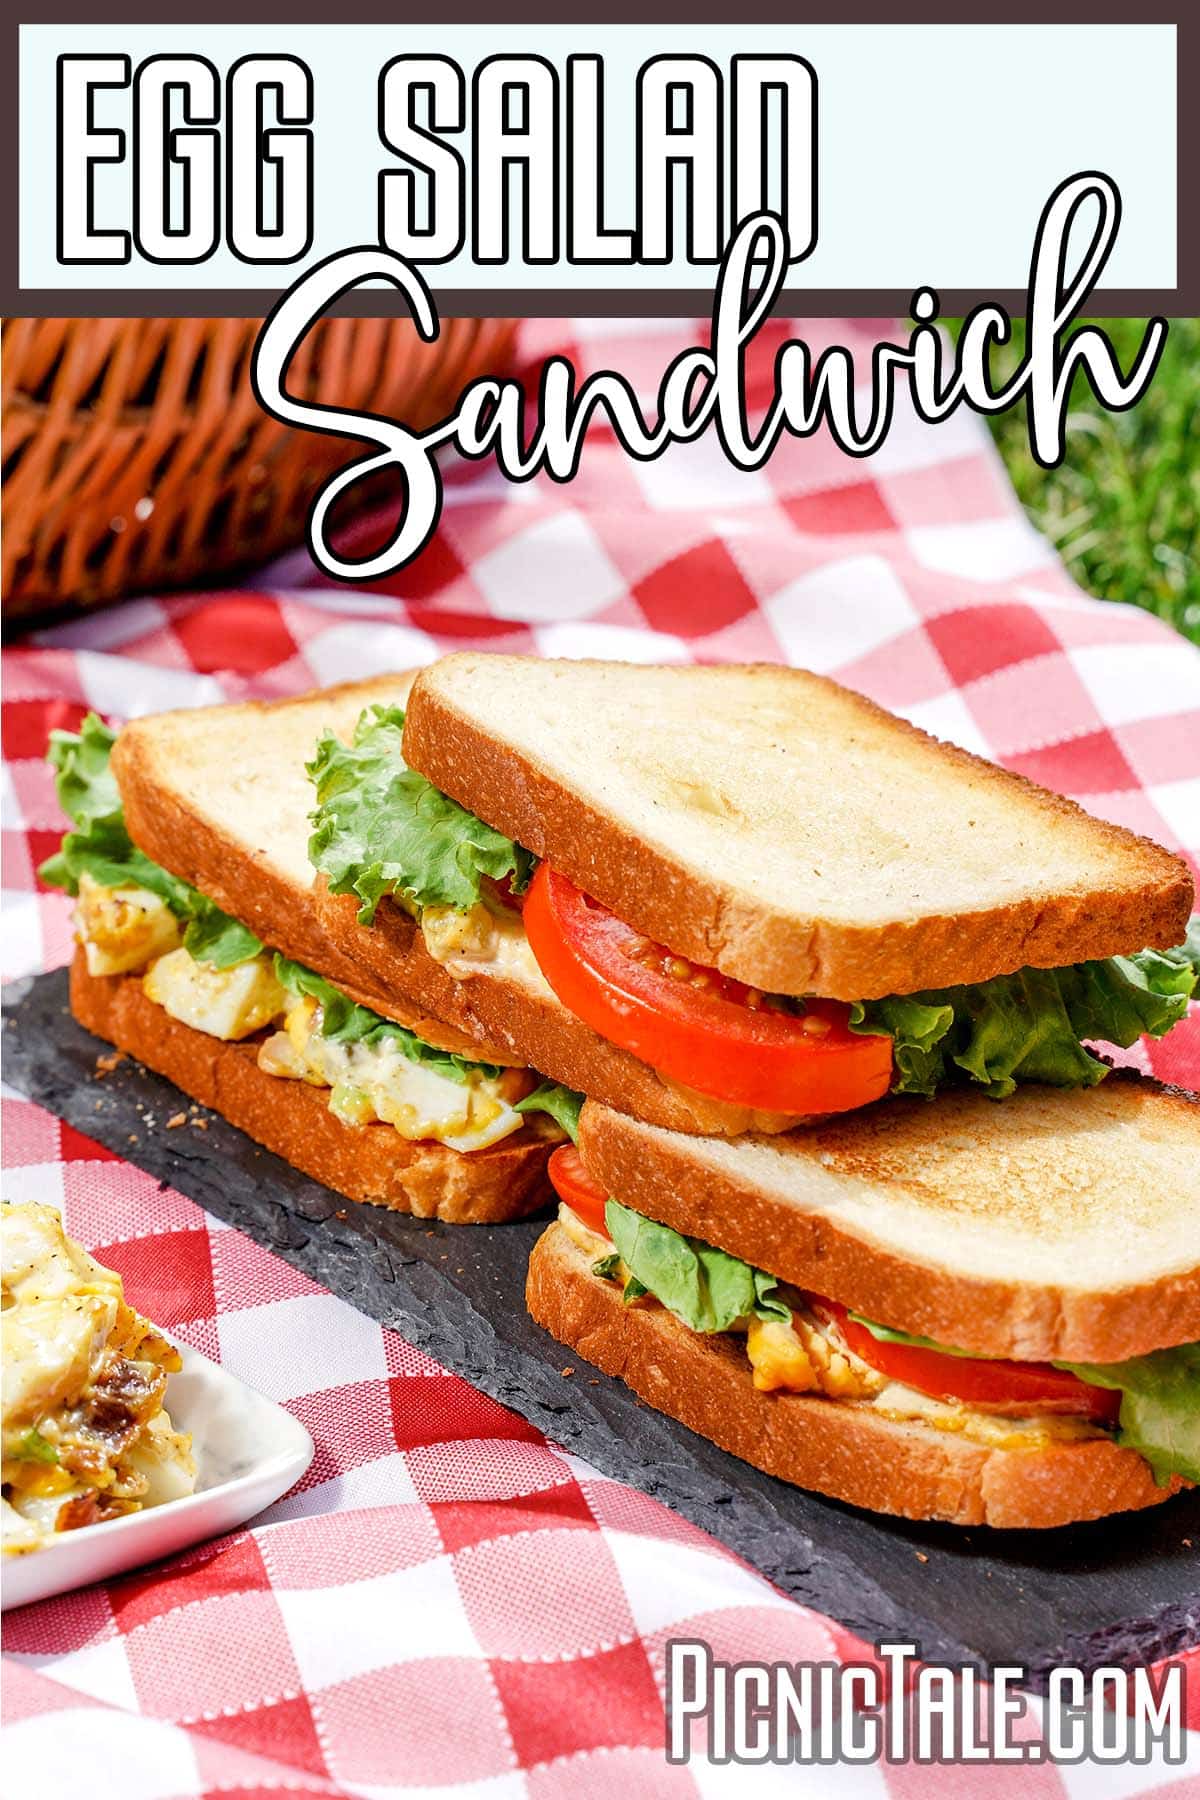 Three Egg salad sandwiches on slate board with picnic cloth.